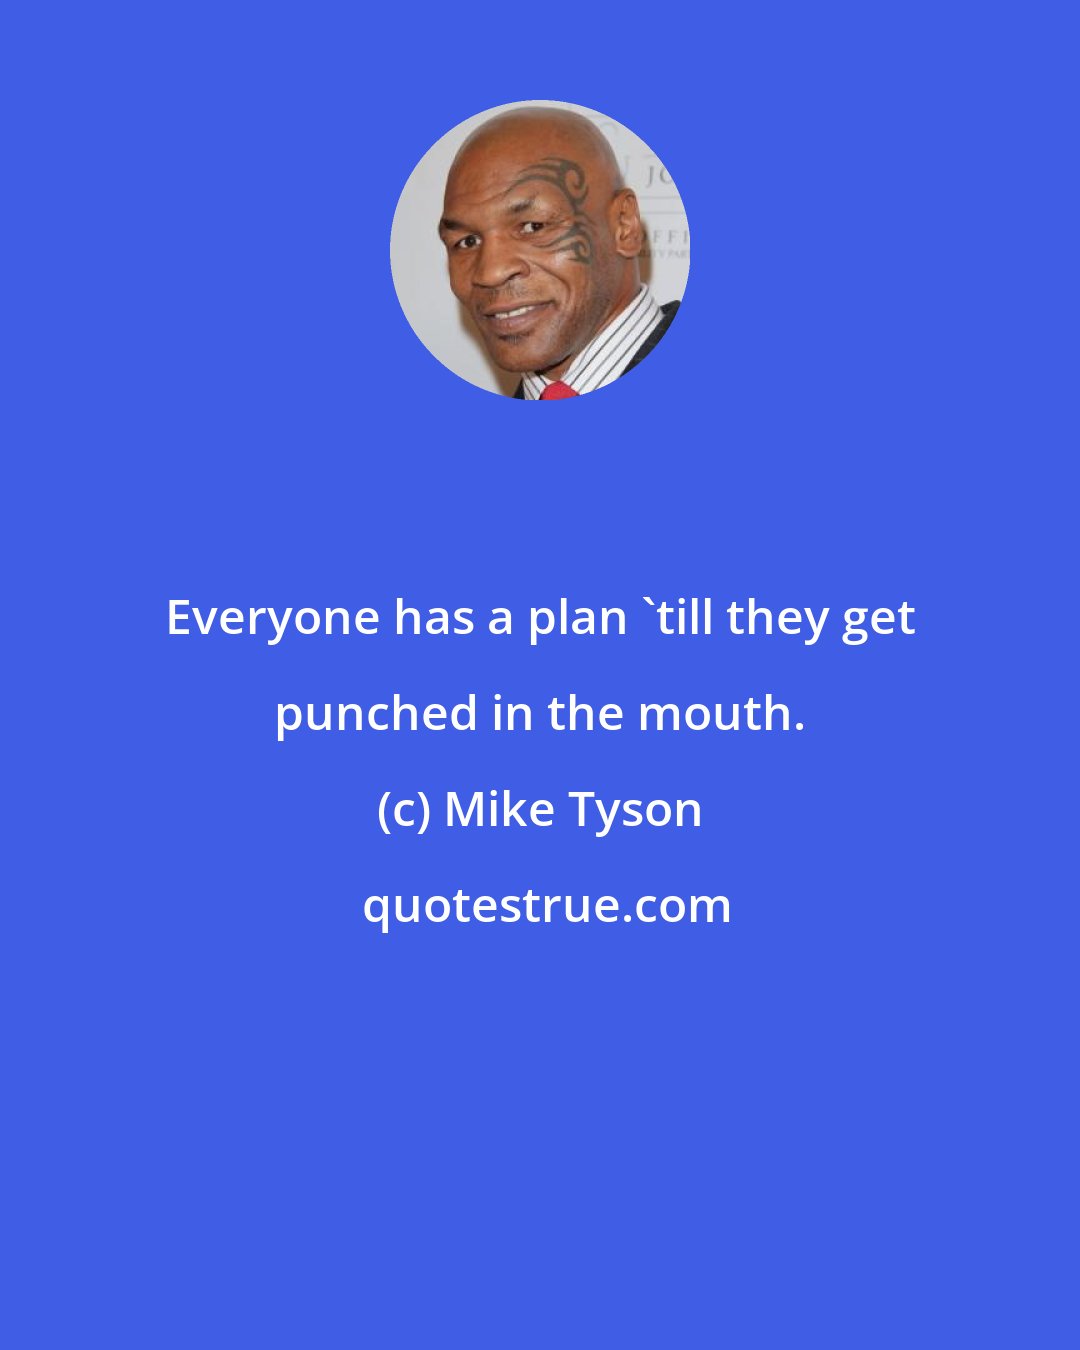 Mike Tyson: Everyone has a plan 'till they get punched in the mouth.